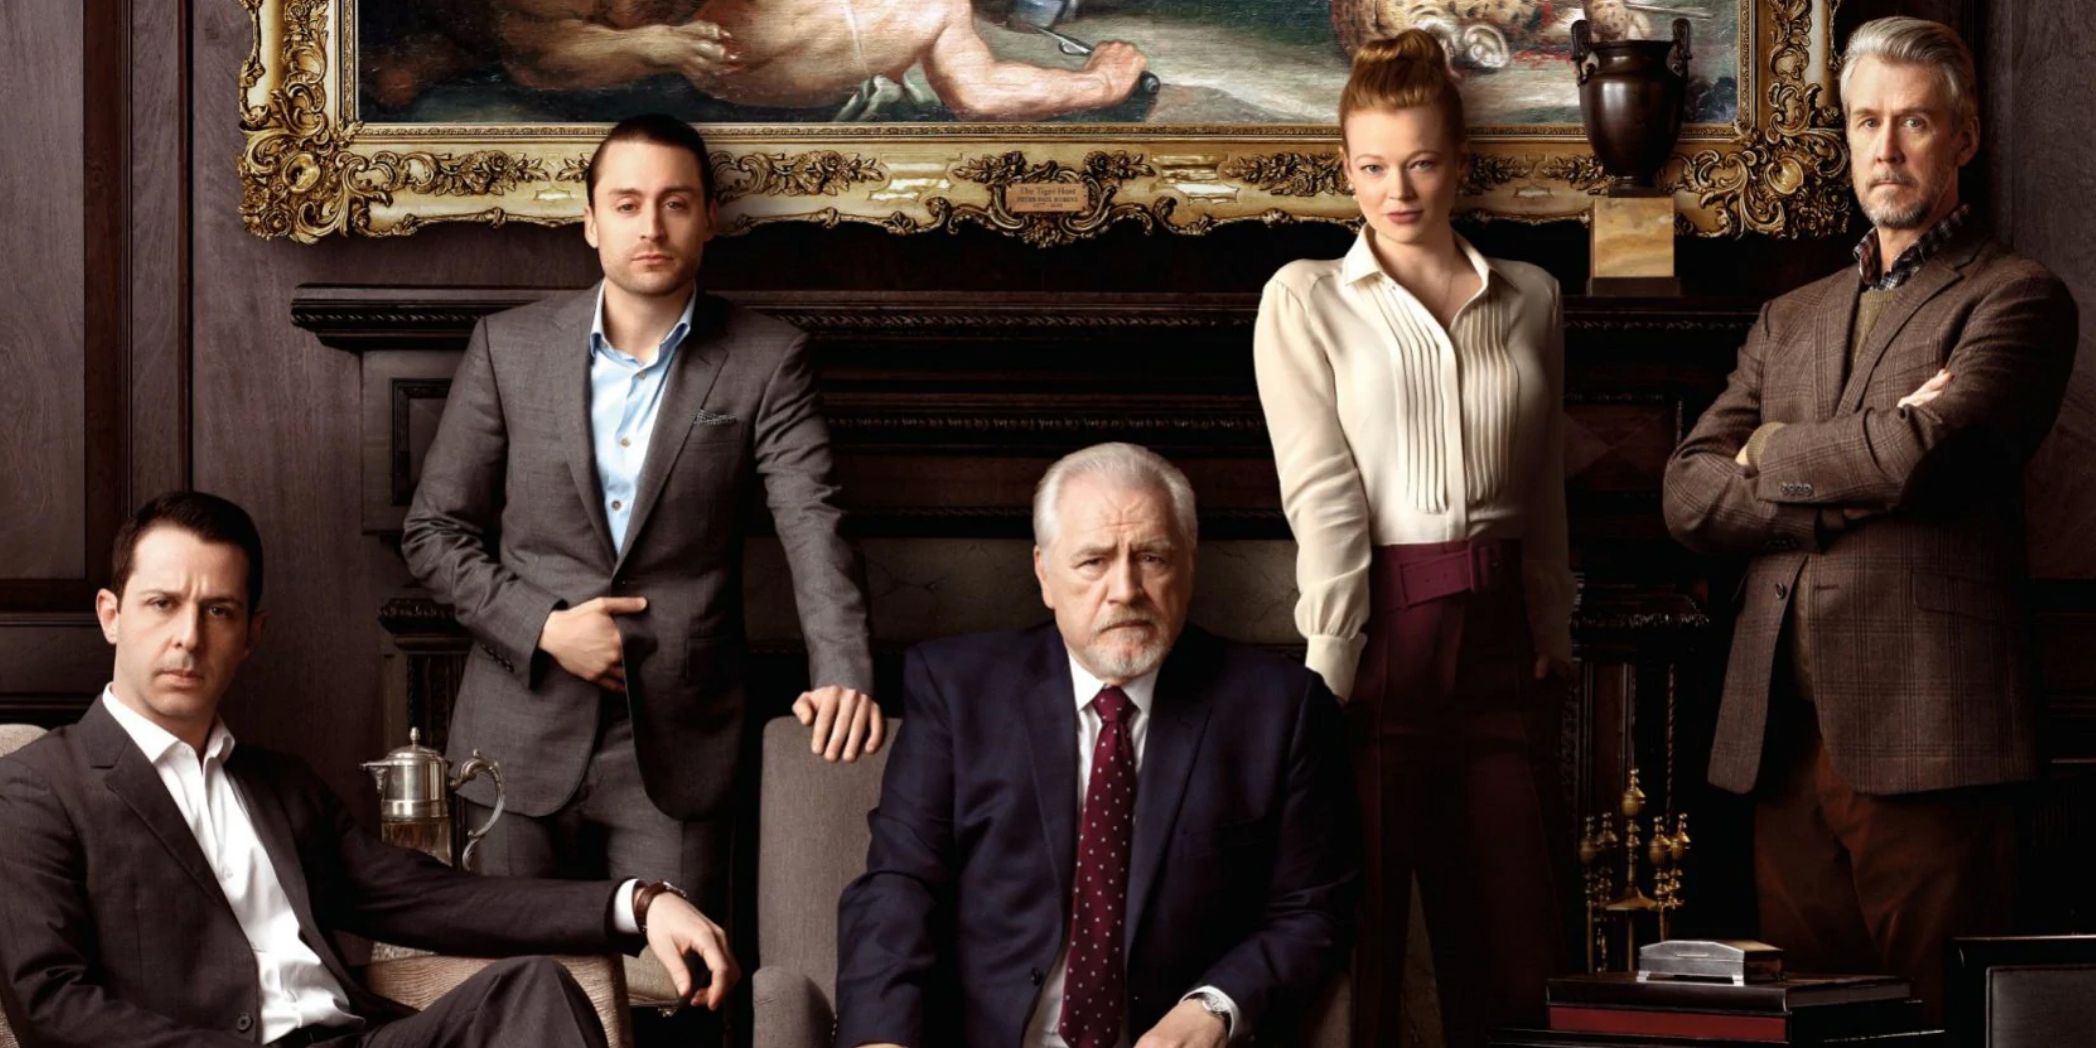 Cast of Succession standing together for a promotional photo shoot